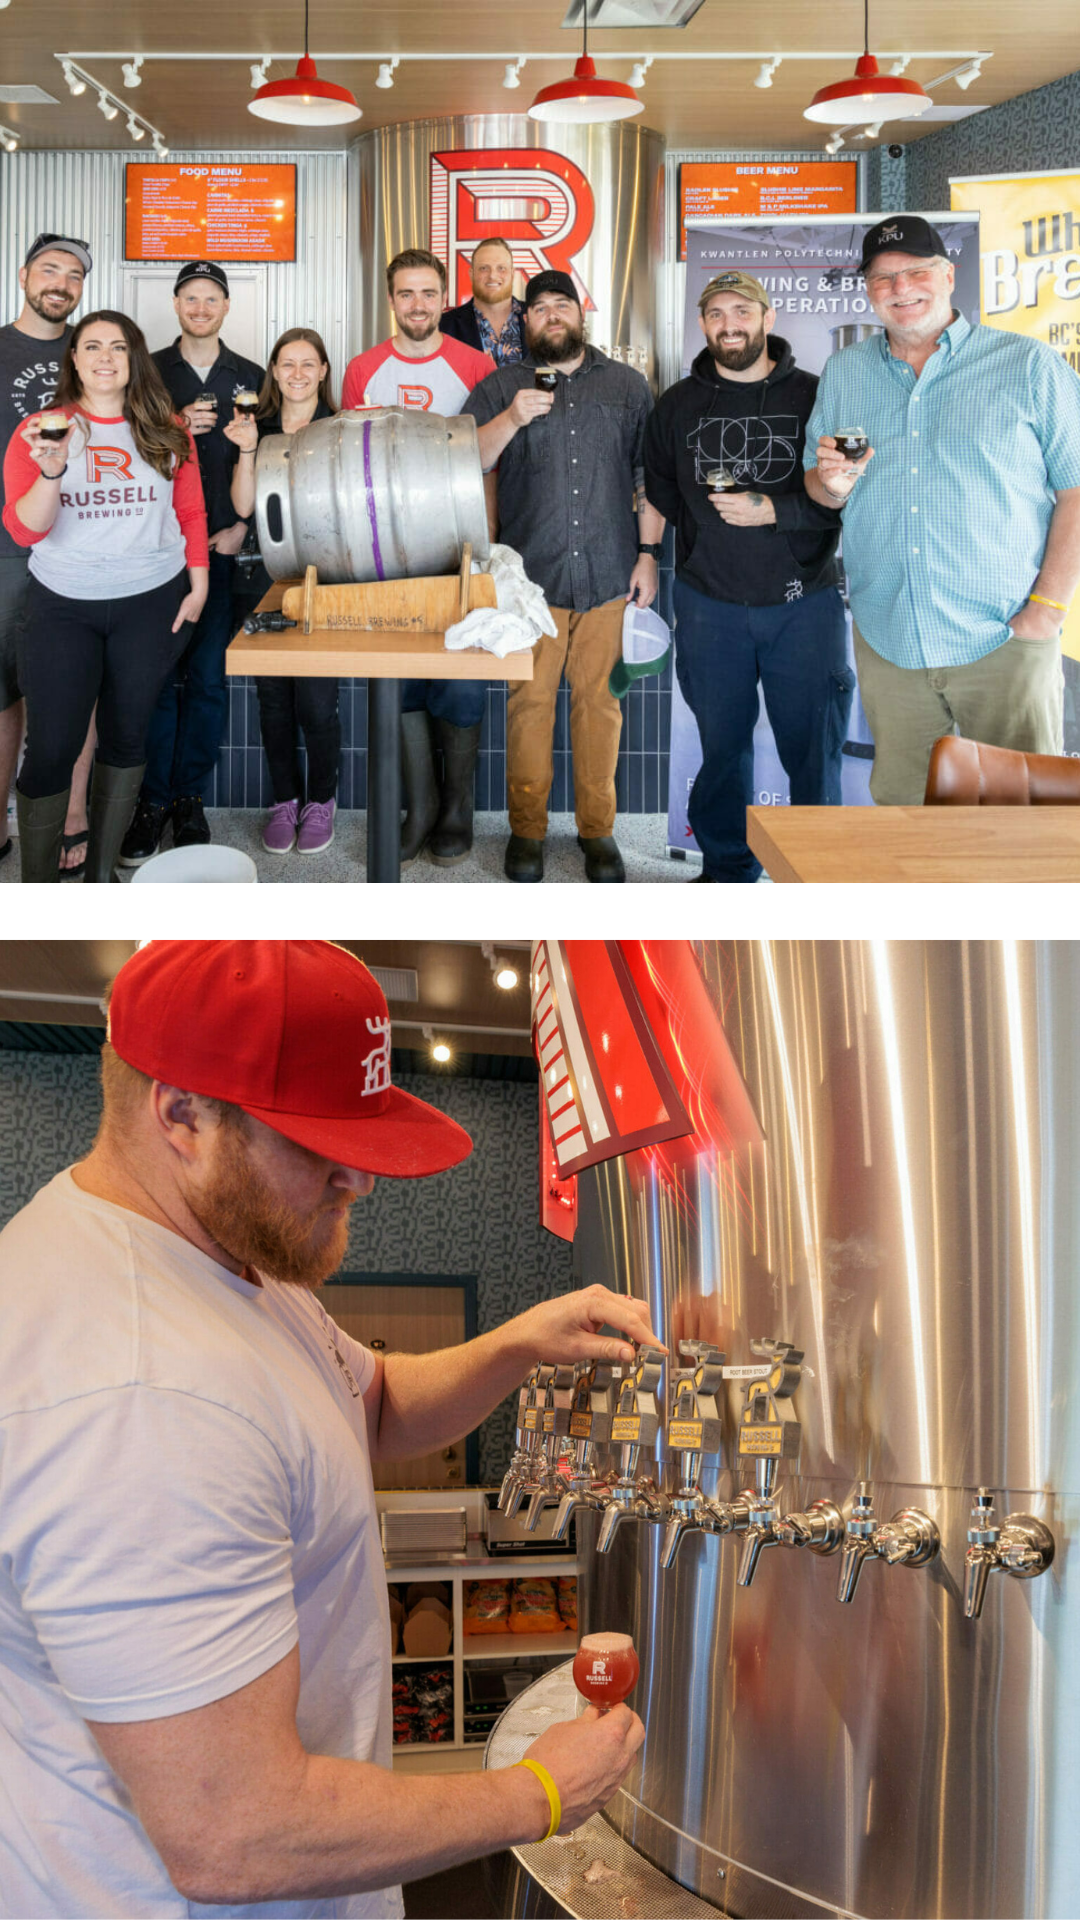 Two images of the Russell Brewing Team - the whole team and the marketing manager, Jimmy Darbyshire, pouring a beer in the tasting room